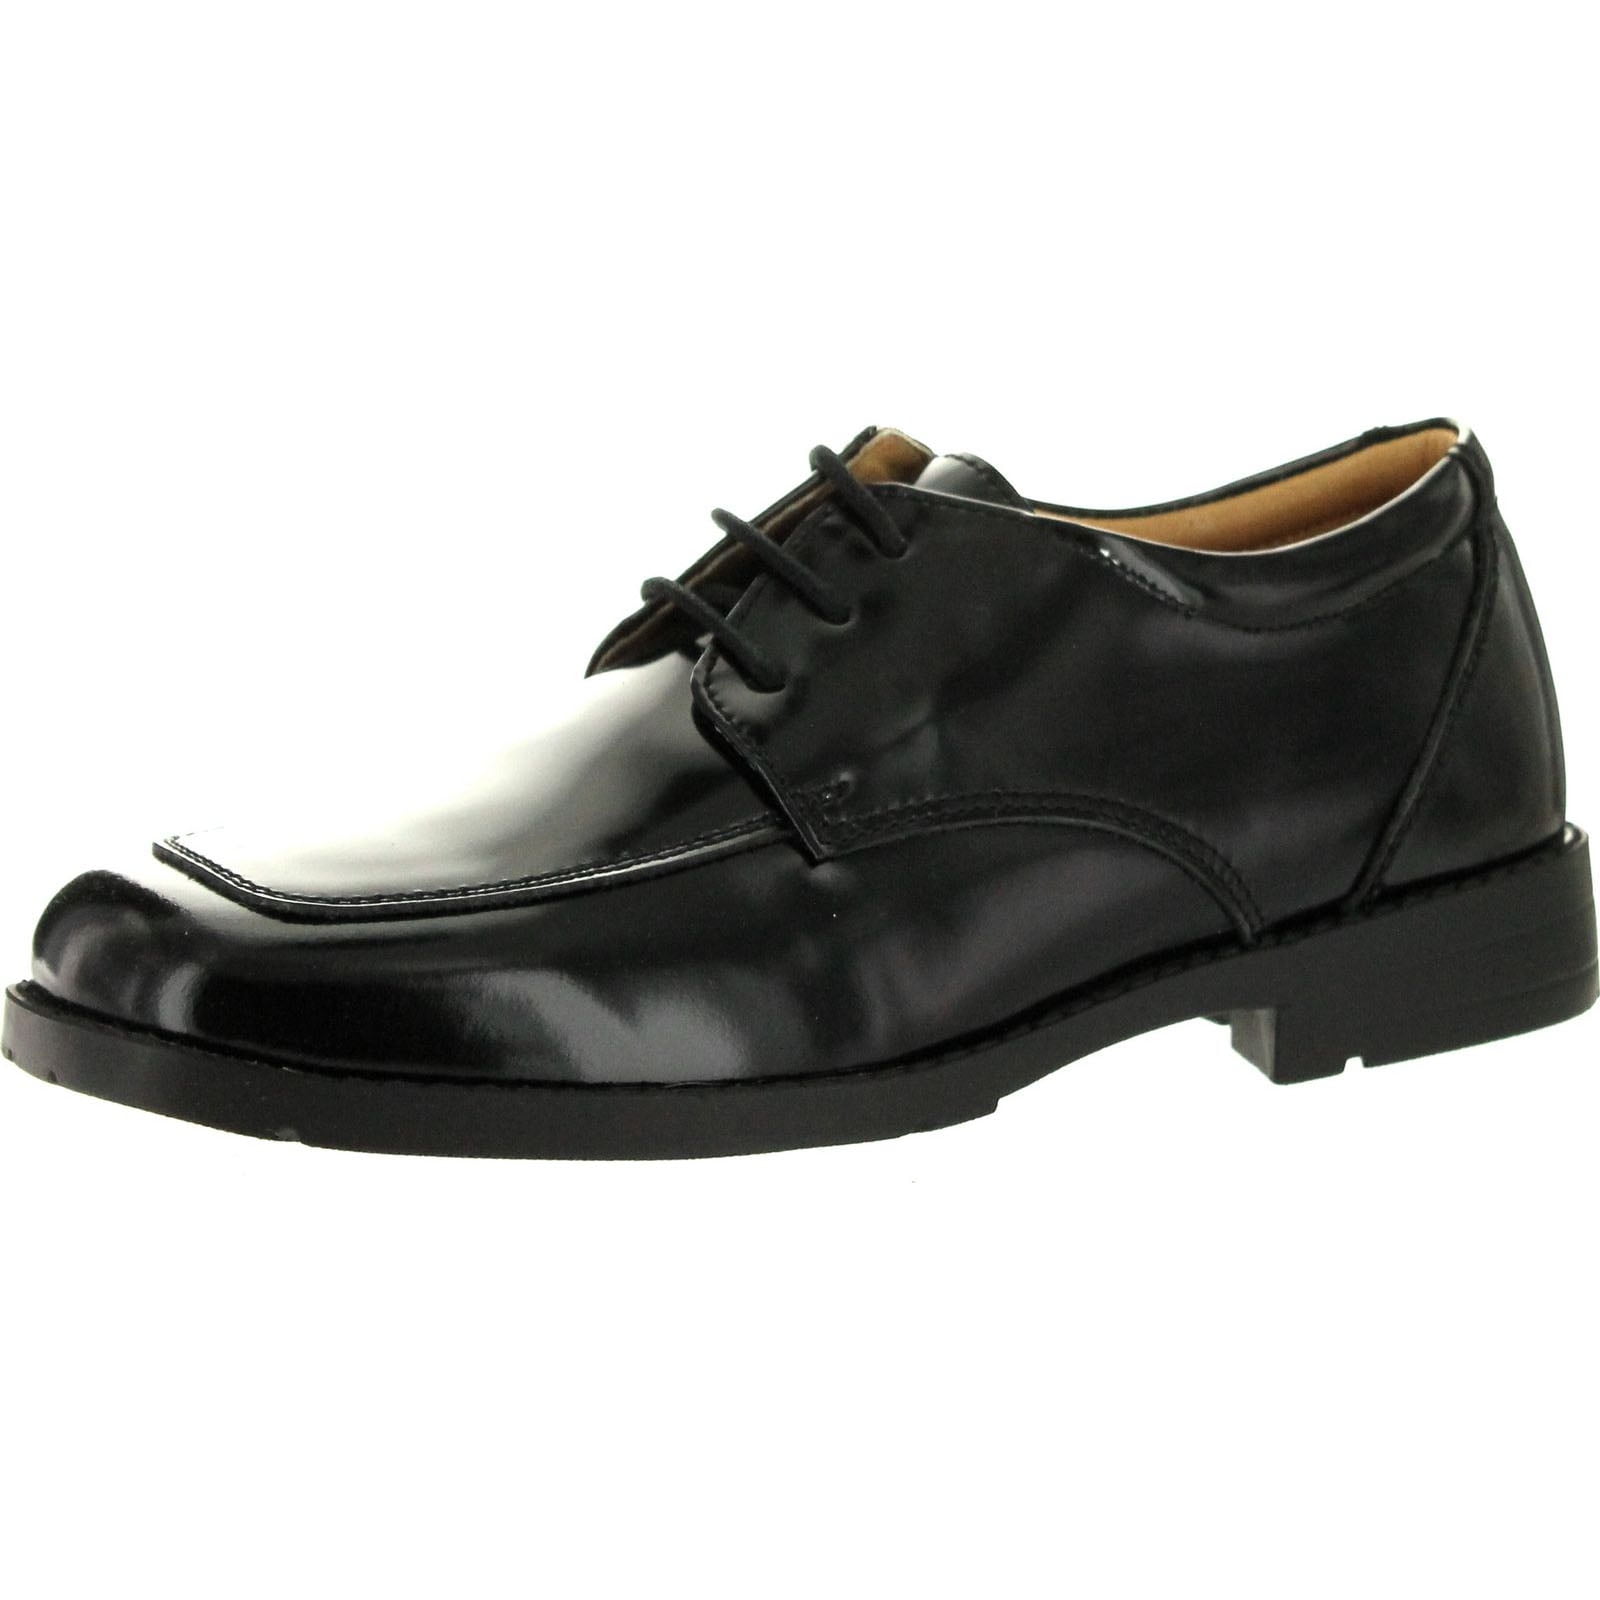 Goor Boys Oxford Lace Up Patent Party Wedding Shoes Black Patent PU 